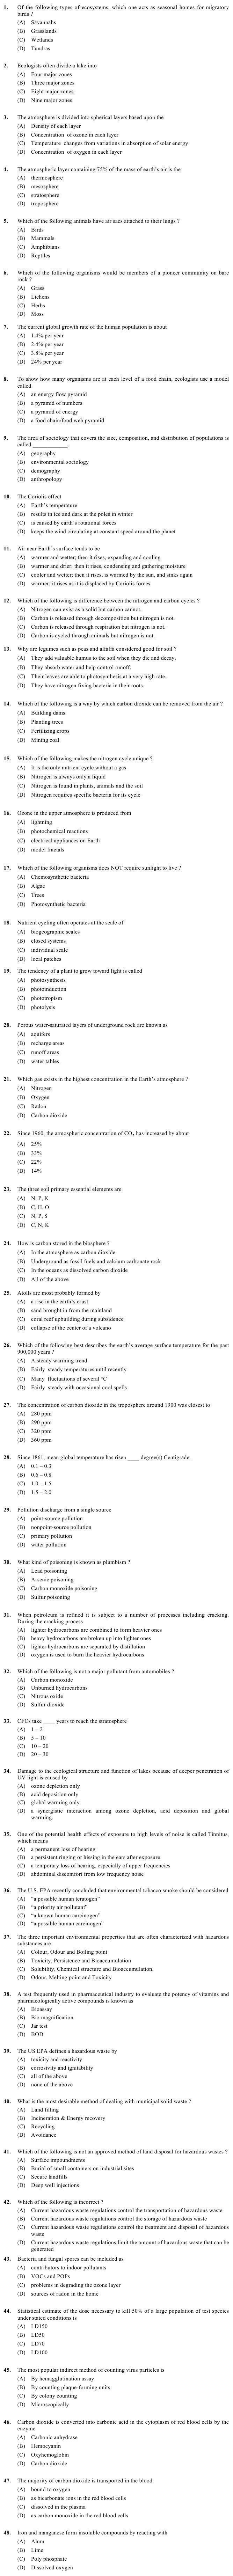 OJEE 2013 Question Paper for PGAT Env. Science